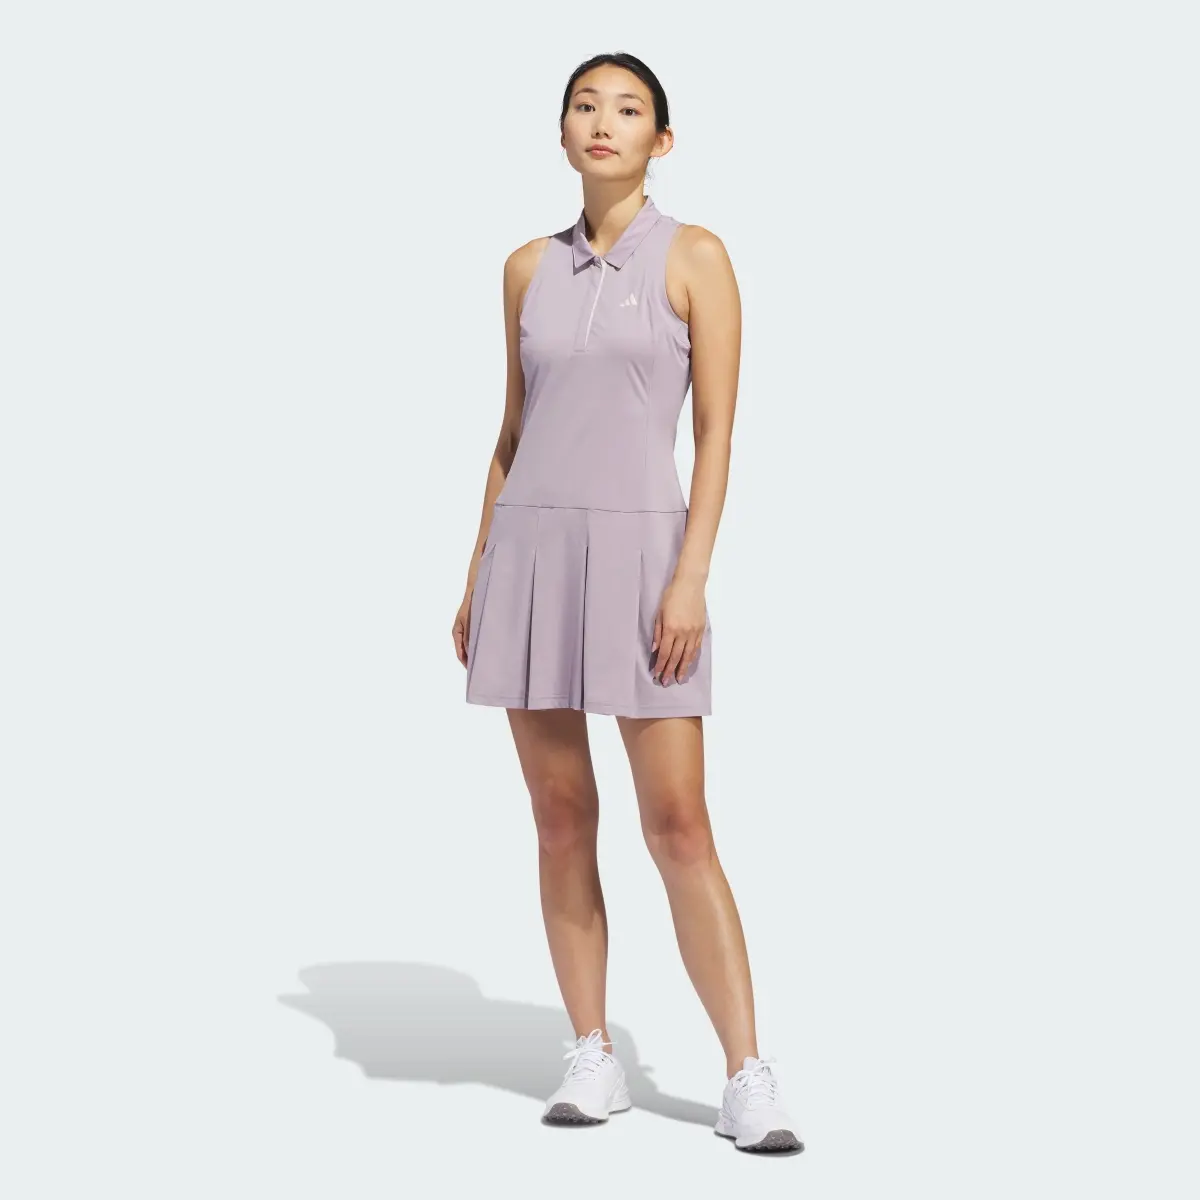 Adidas Women's Ultimate365 Tour Pleated Dress. 2